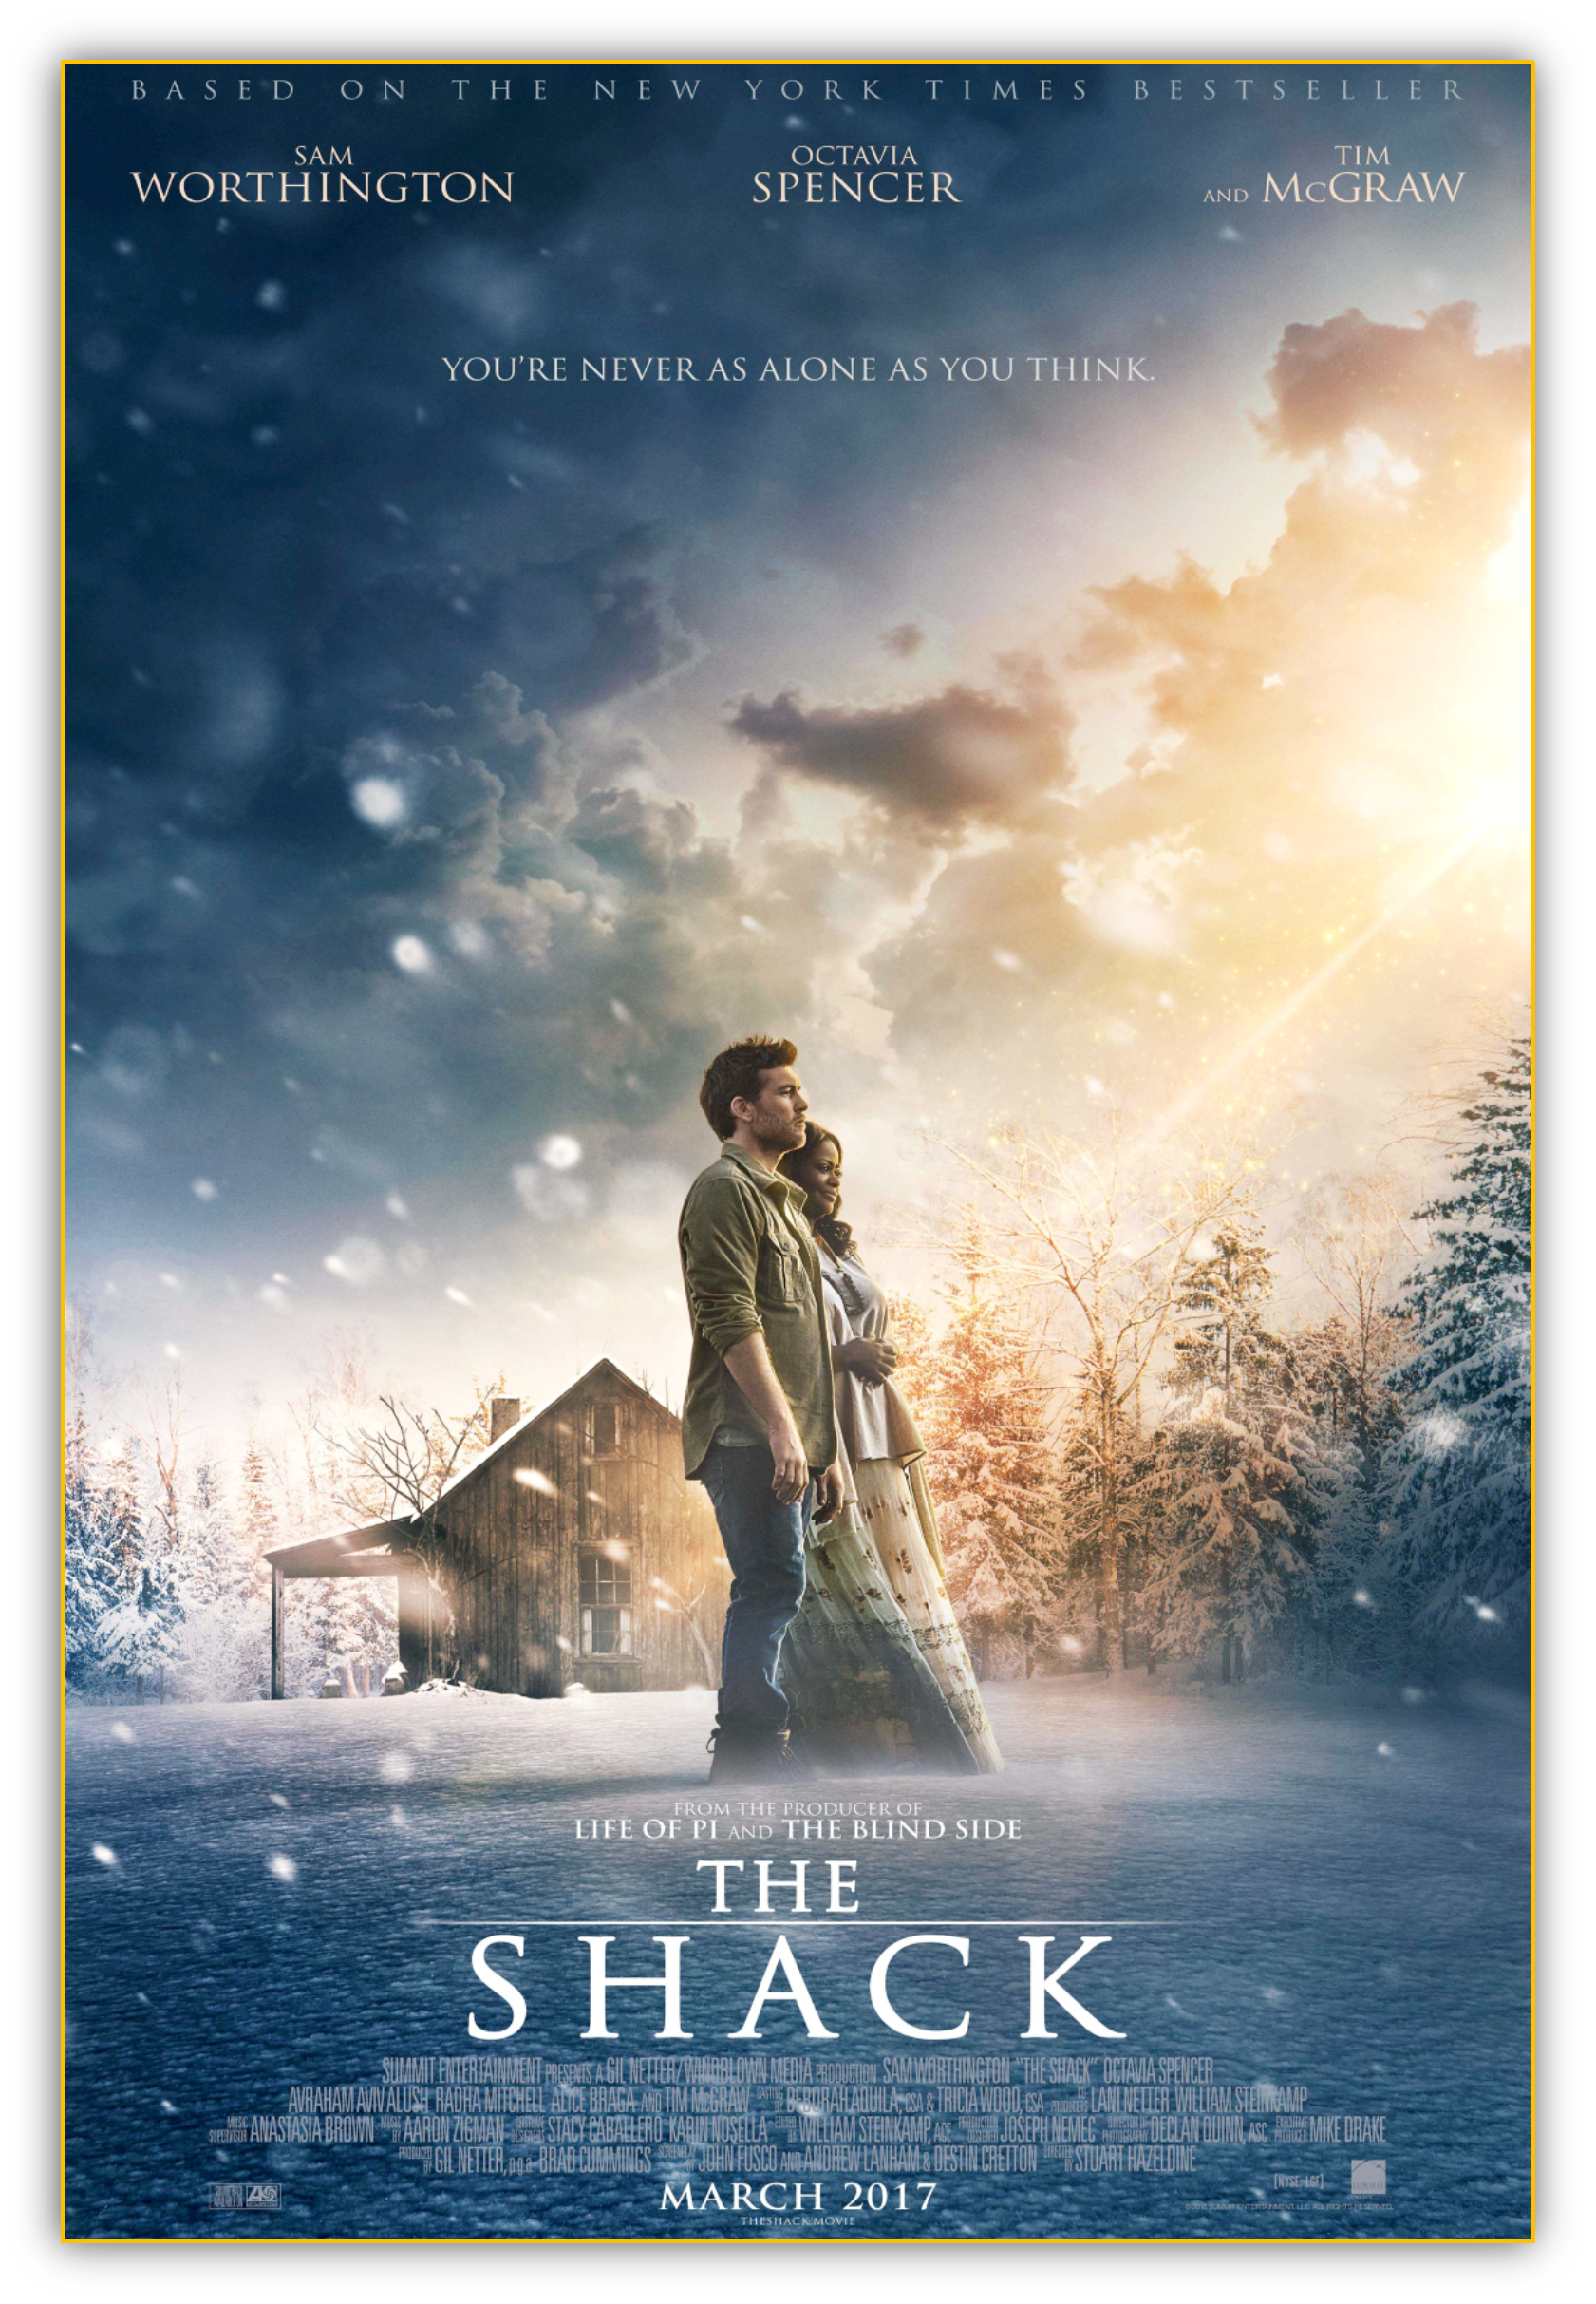 Exposé - The Shack Book Movie Poster False Teacher William Paul Young │ Exposed Grace Truth Spirit GotLifeQuestions.com #GLQ (1.1.0).png